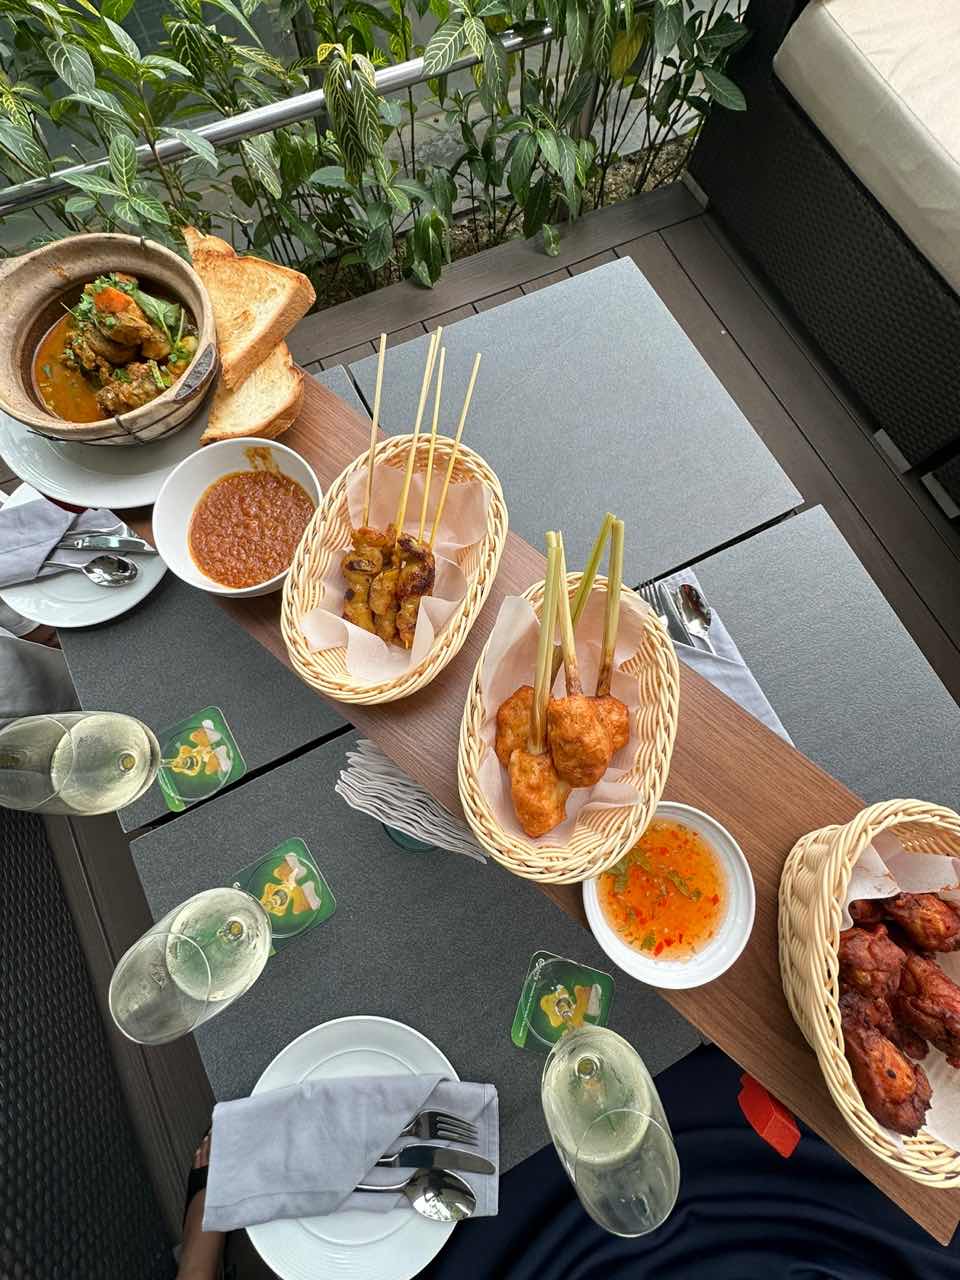 A platter filled with malaysian cuisine and satay